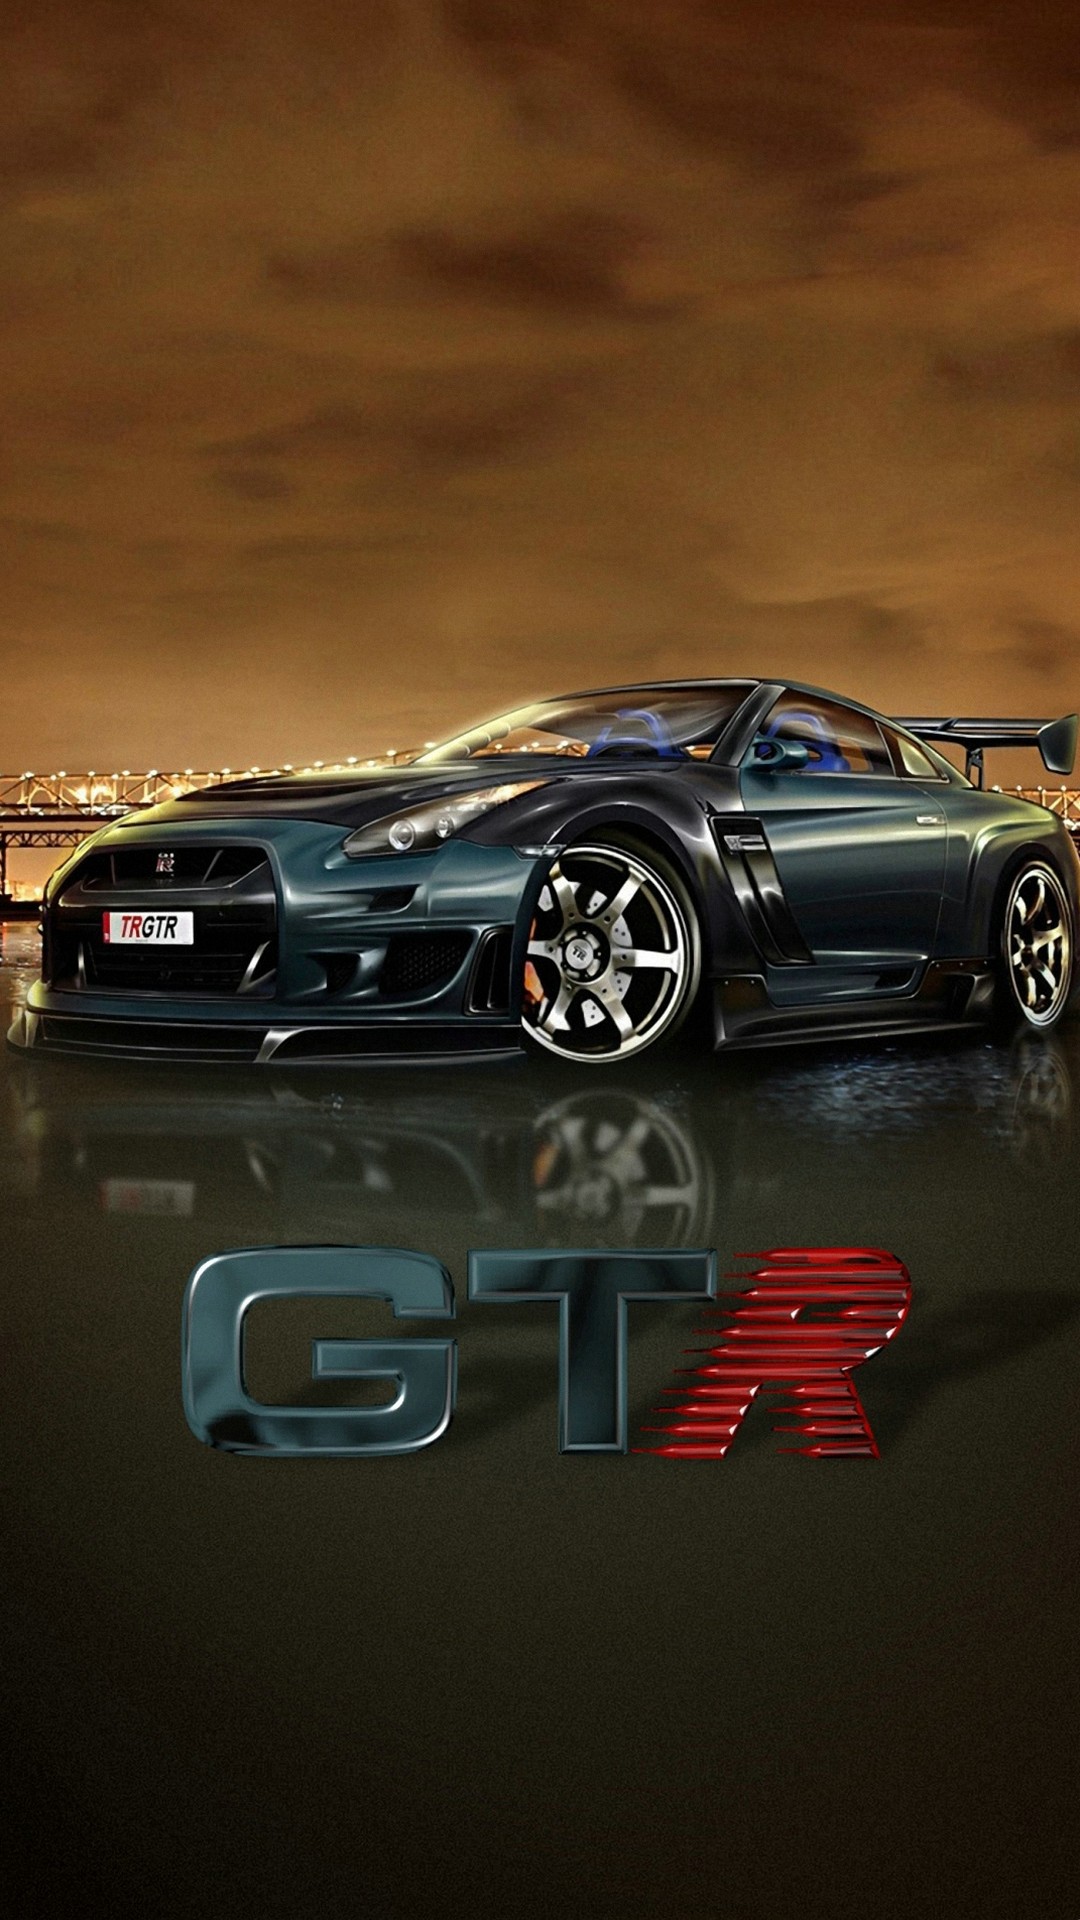 GTR Android Wallpaper with HD resolution 1080x1920